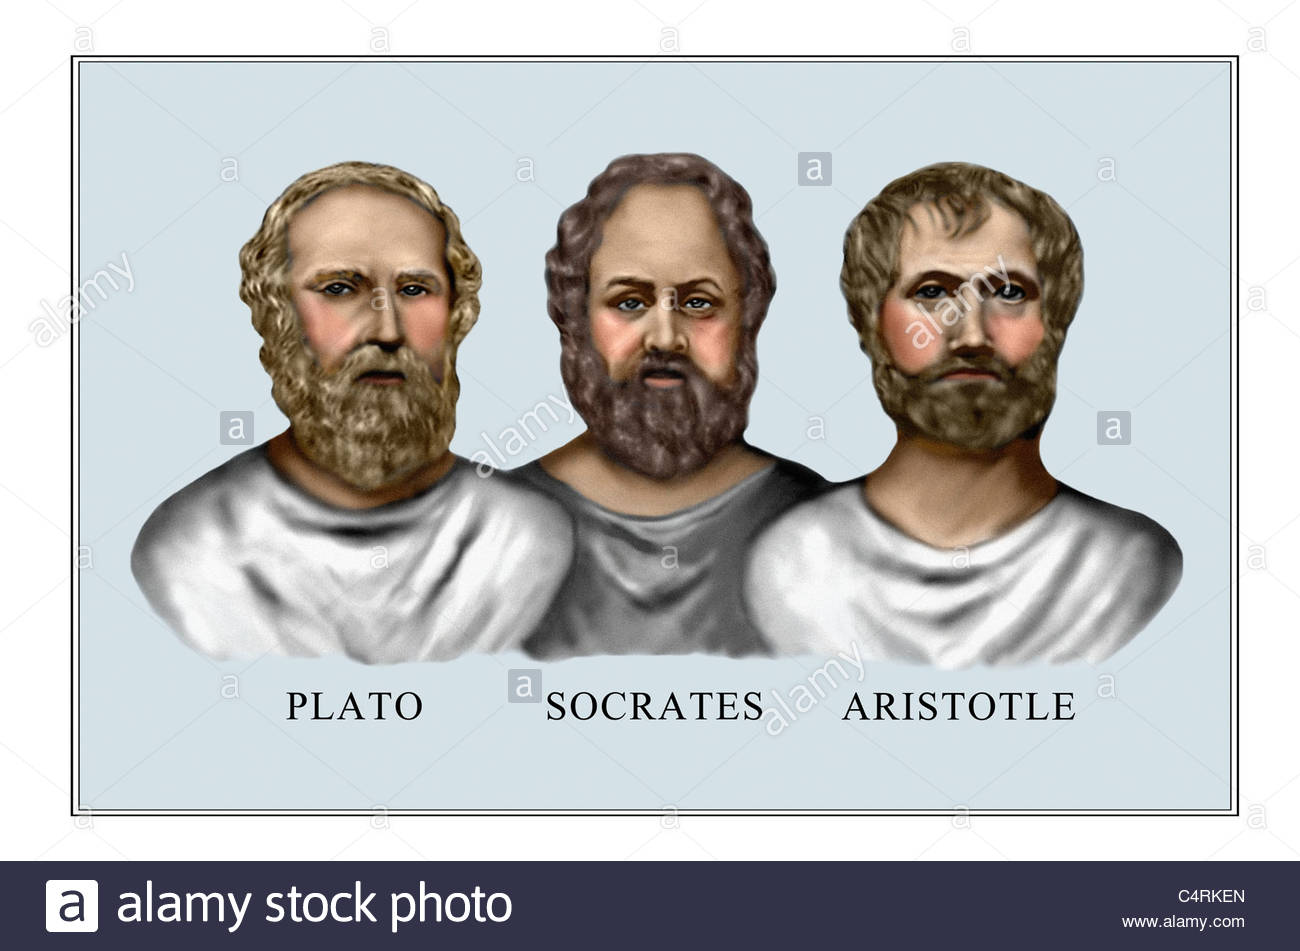 what were the beliefs of socrates plato and aristotle